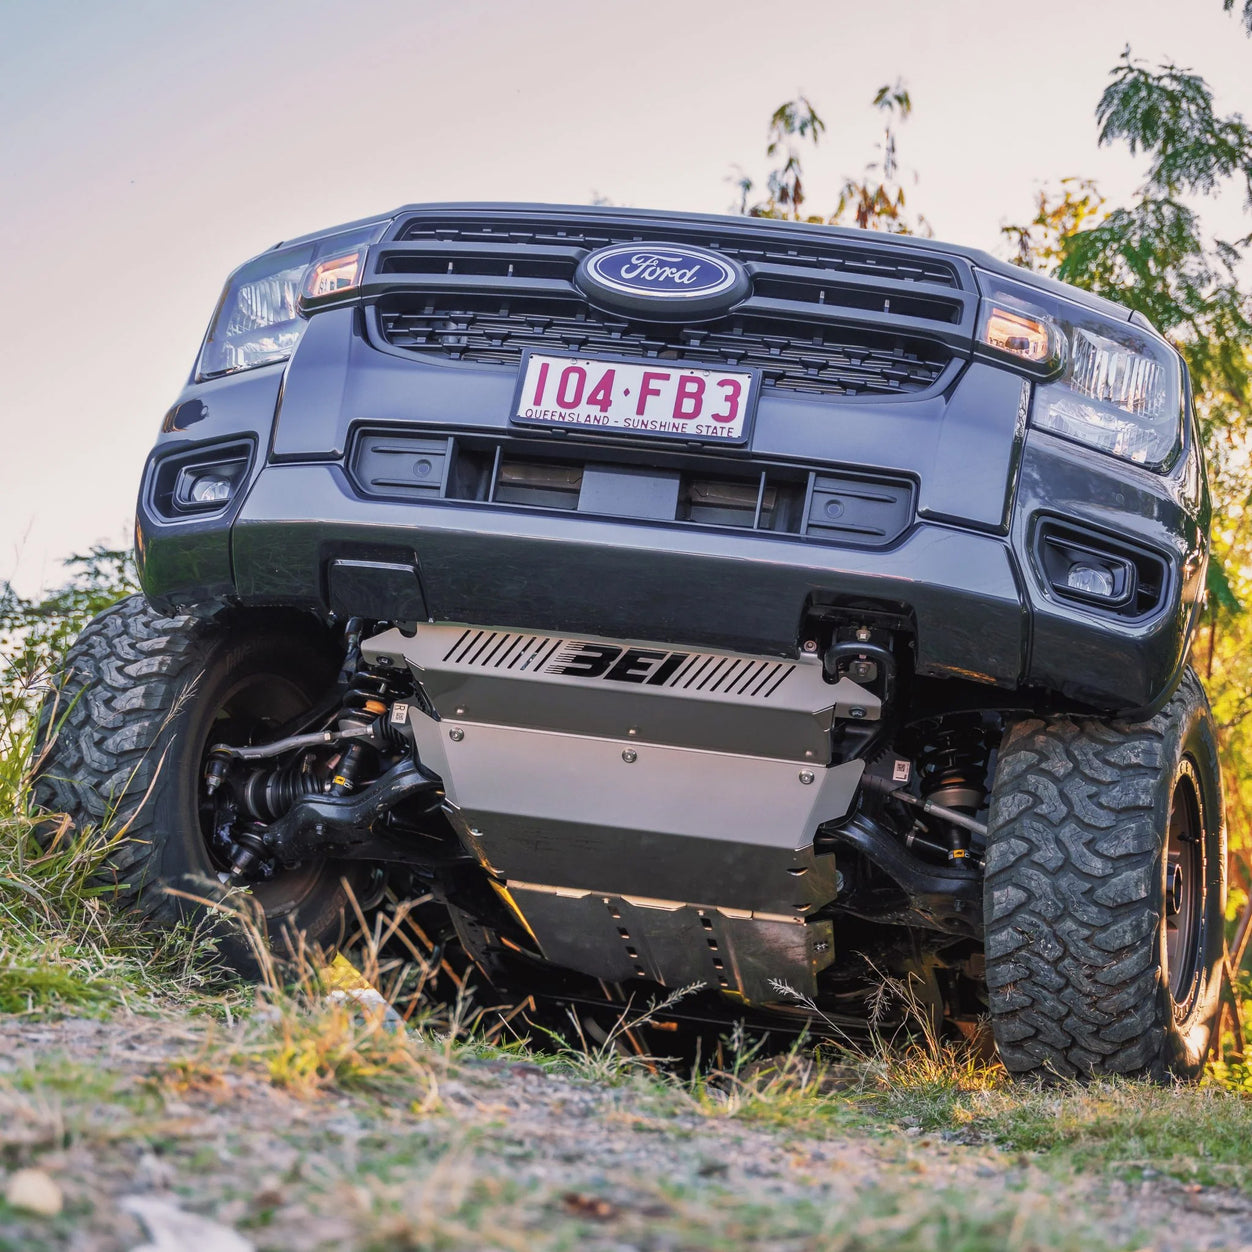 BEIHOUSE FORD RANGER NEXT GEN UNDERBODY PROTECTION